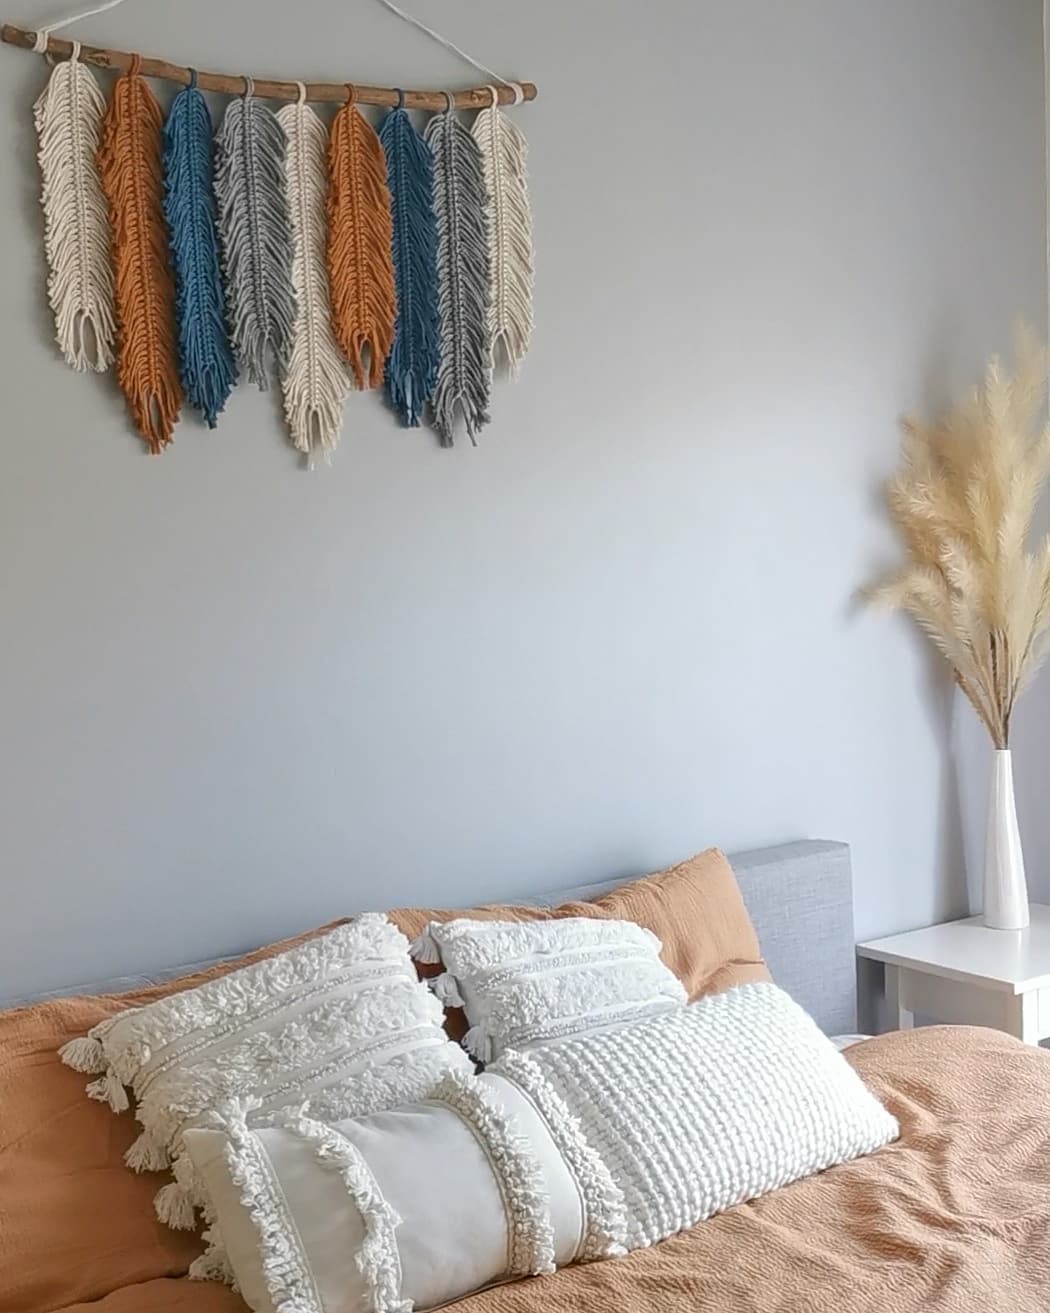 Extra large feathers wall hanging